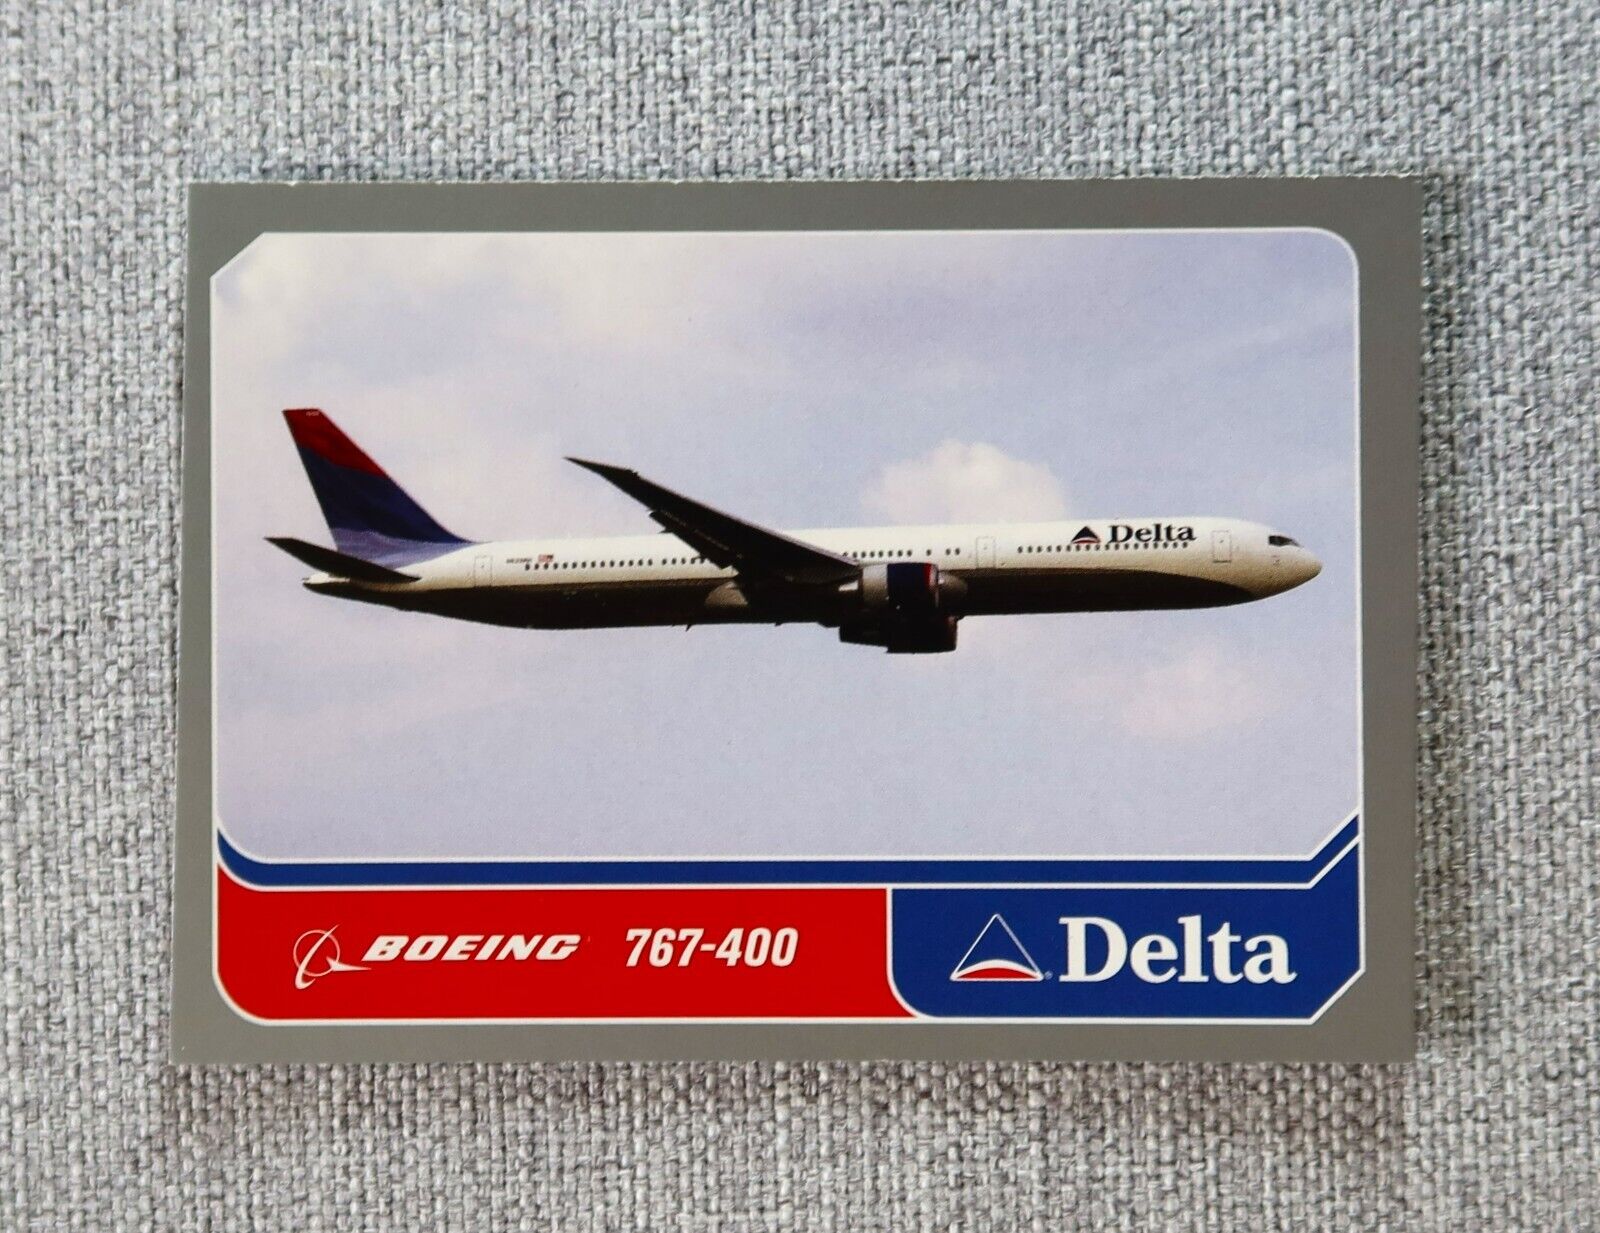 Delta Air Lines Aircraft Trading Card # 9 Boeing 767-400 Aircraft Info Card 2003